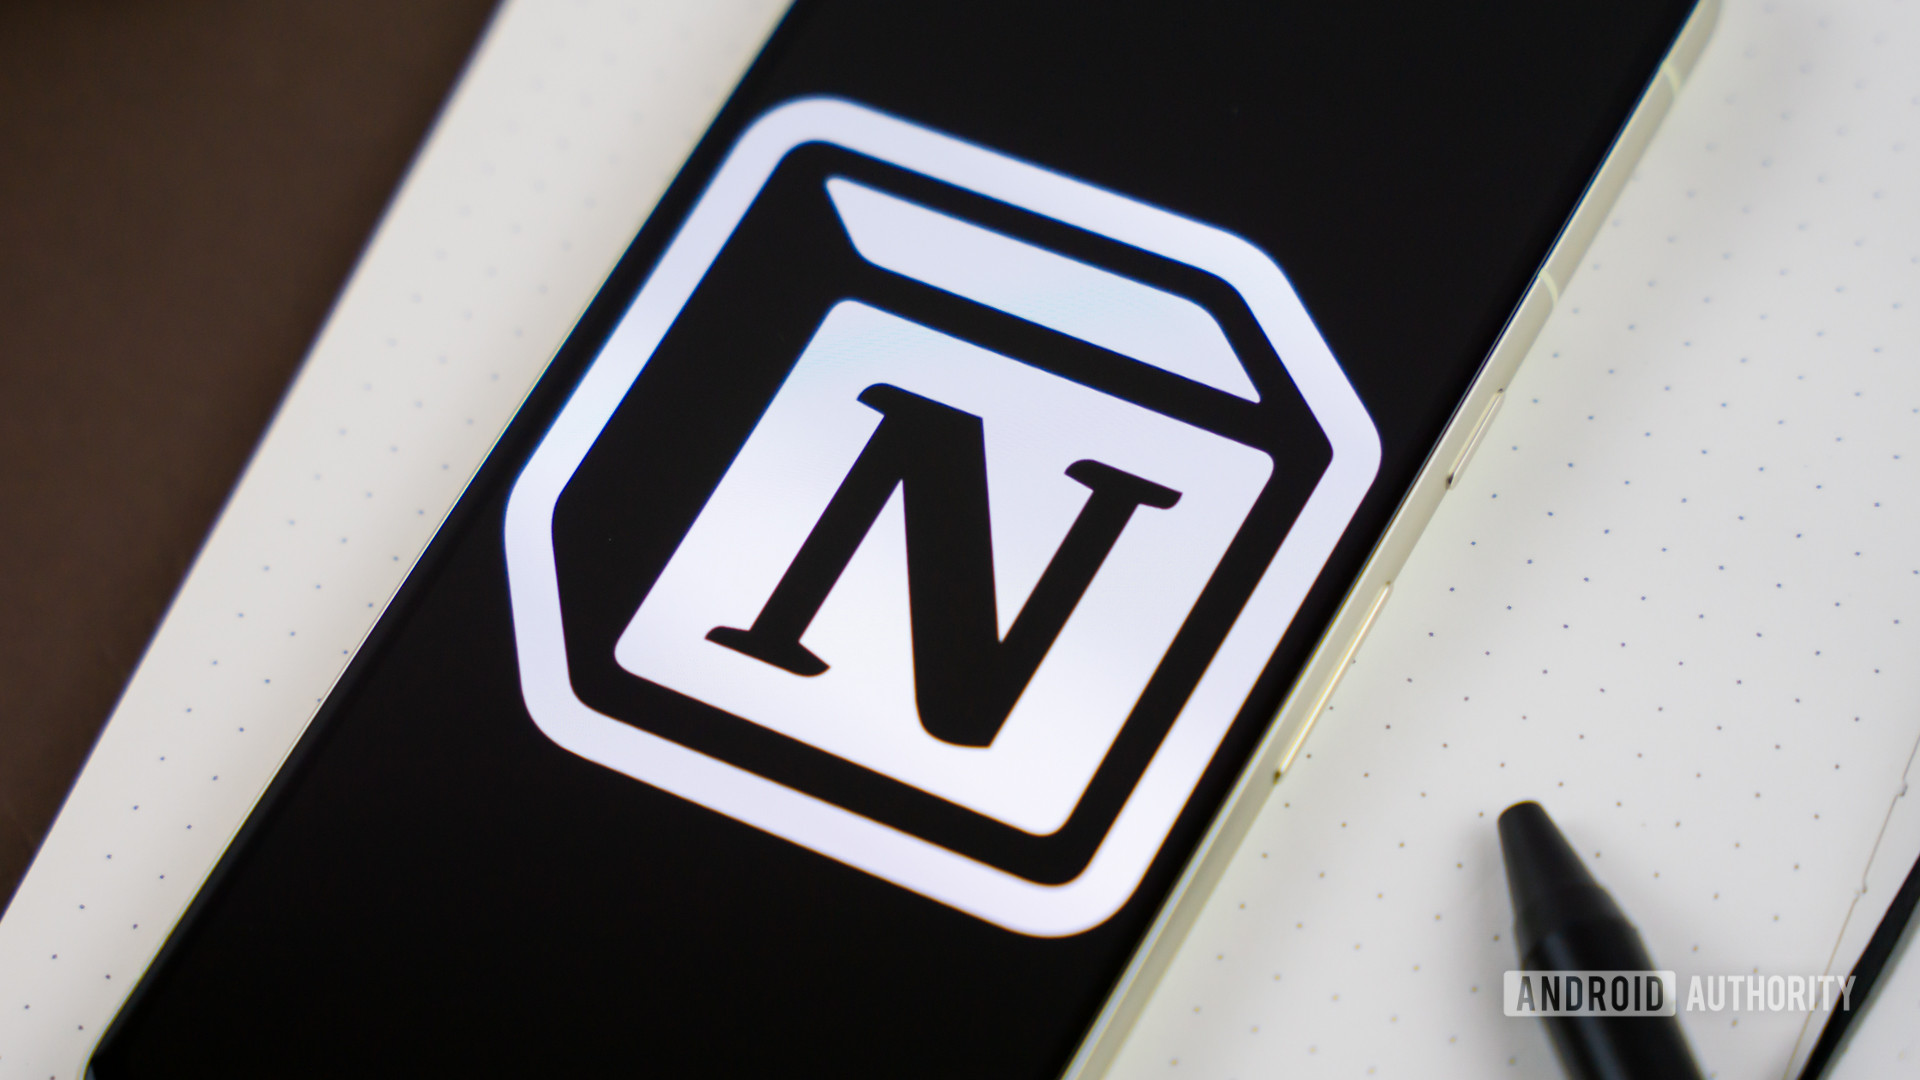 Notion logo on smartphone next to other office products Stock photo 6